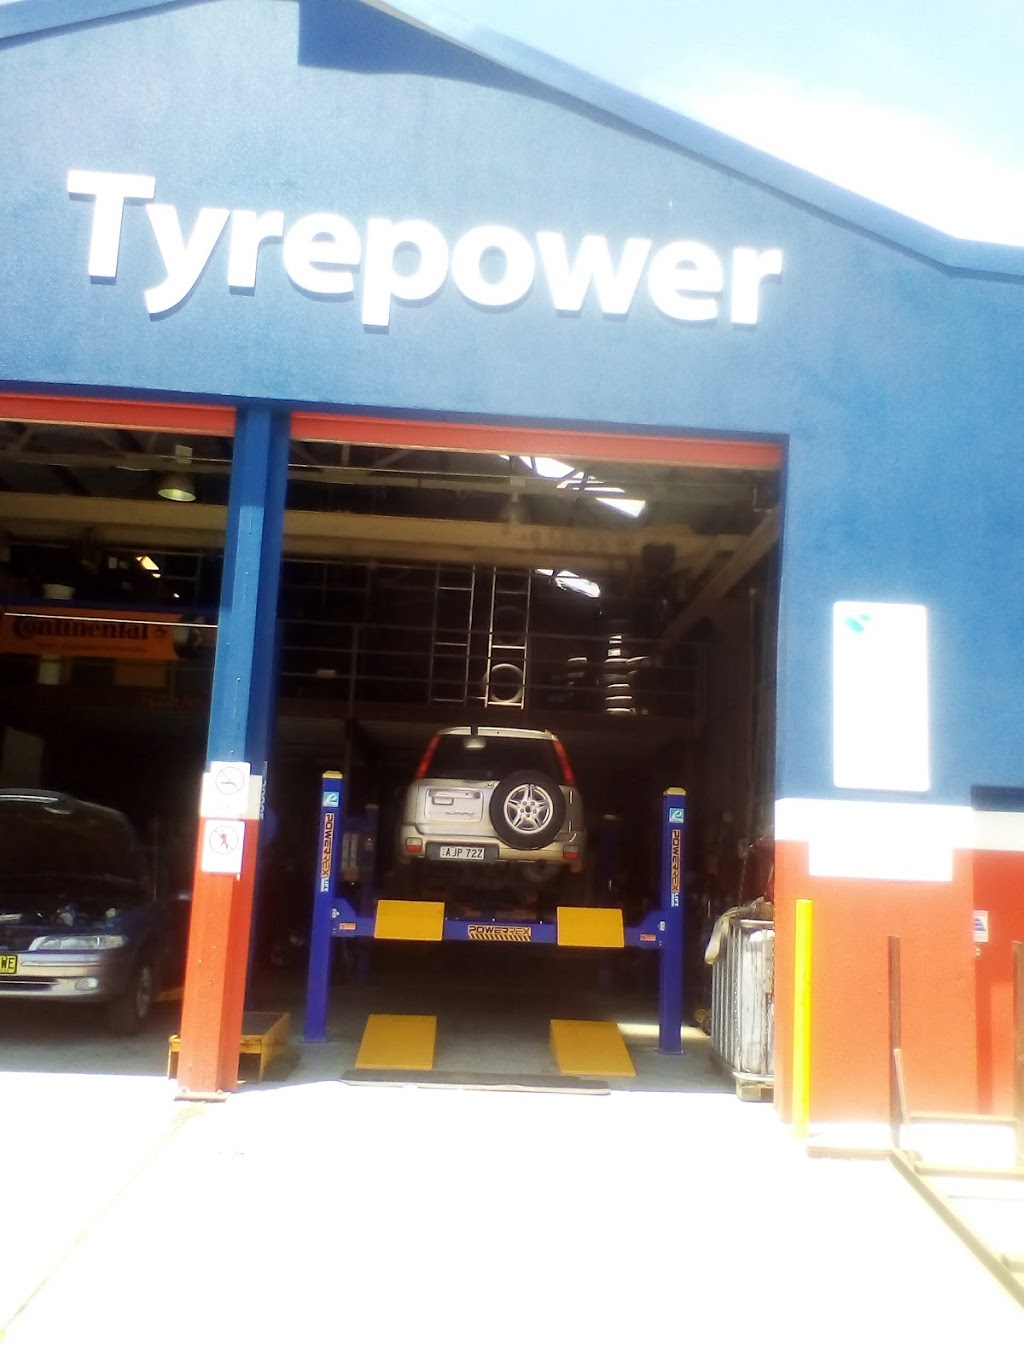 Bears Tyrepower Forster Tuncurry | car repair | 23 Pine Ave, Tuncurry NSW 2428, Australia | 0265555023 OR +61 2 6555 5023